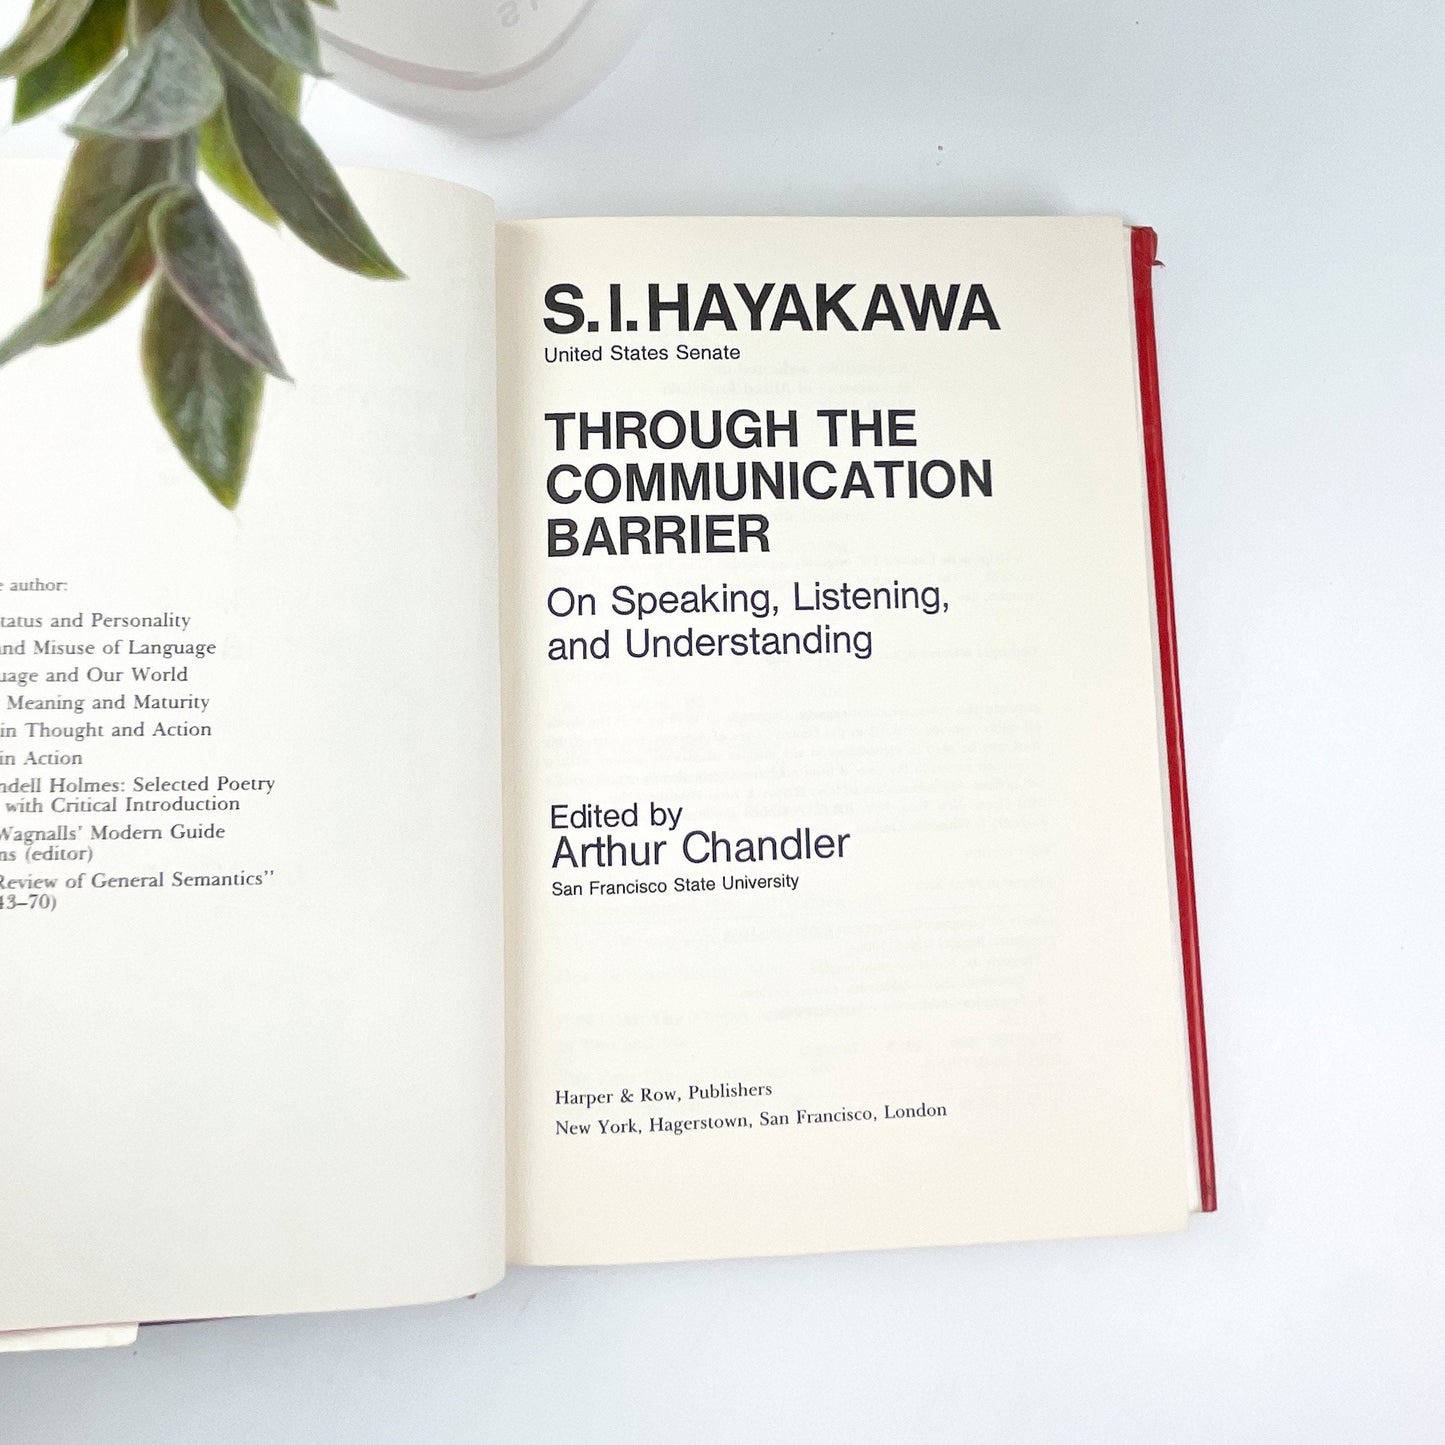 Vintage Signed Book, Through the Communication Barrier by S.I. Hayakawa